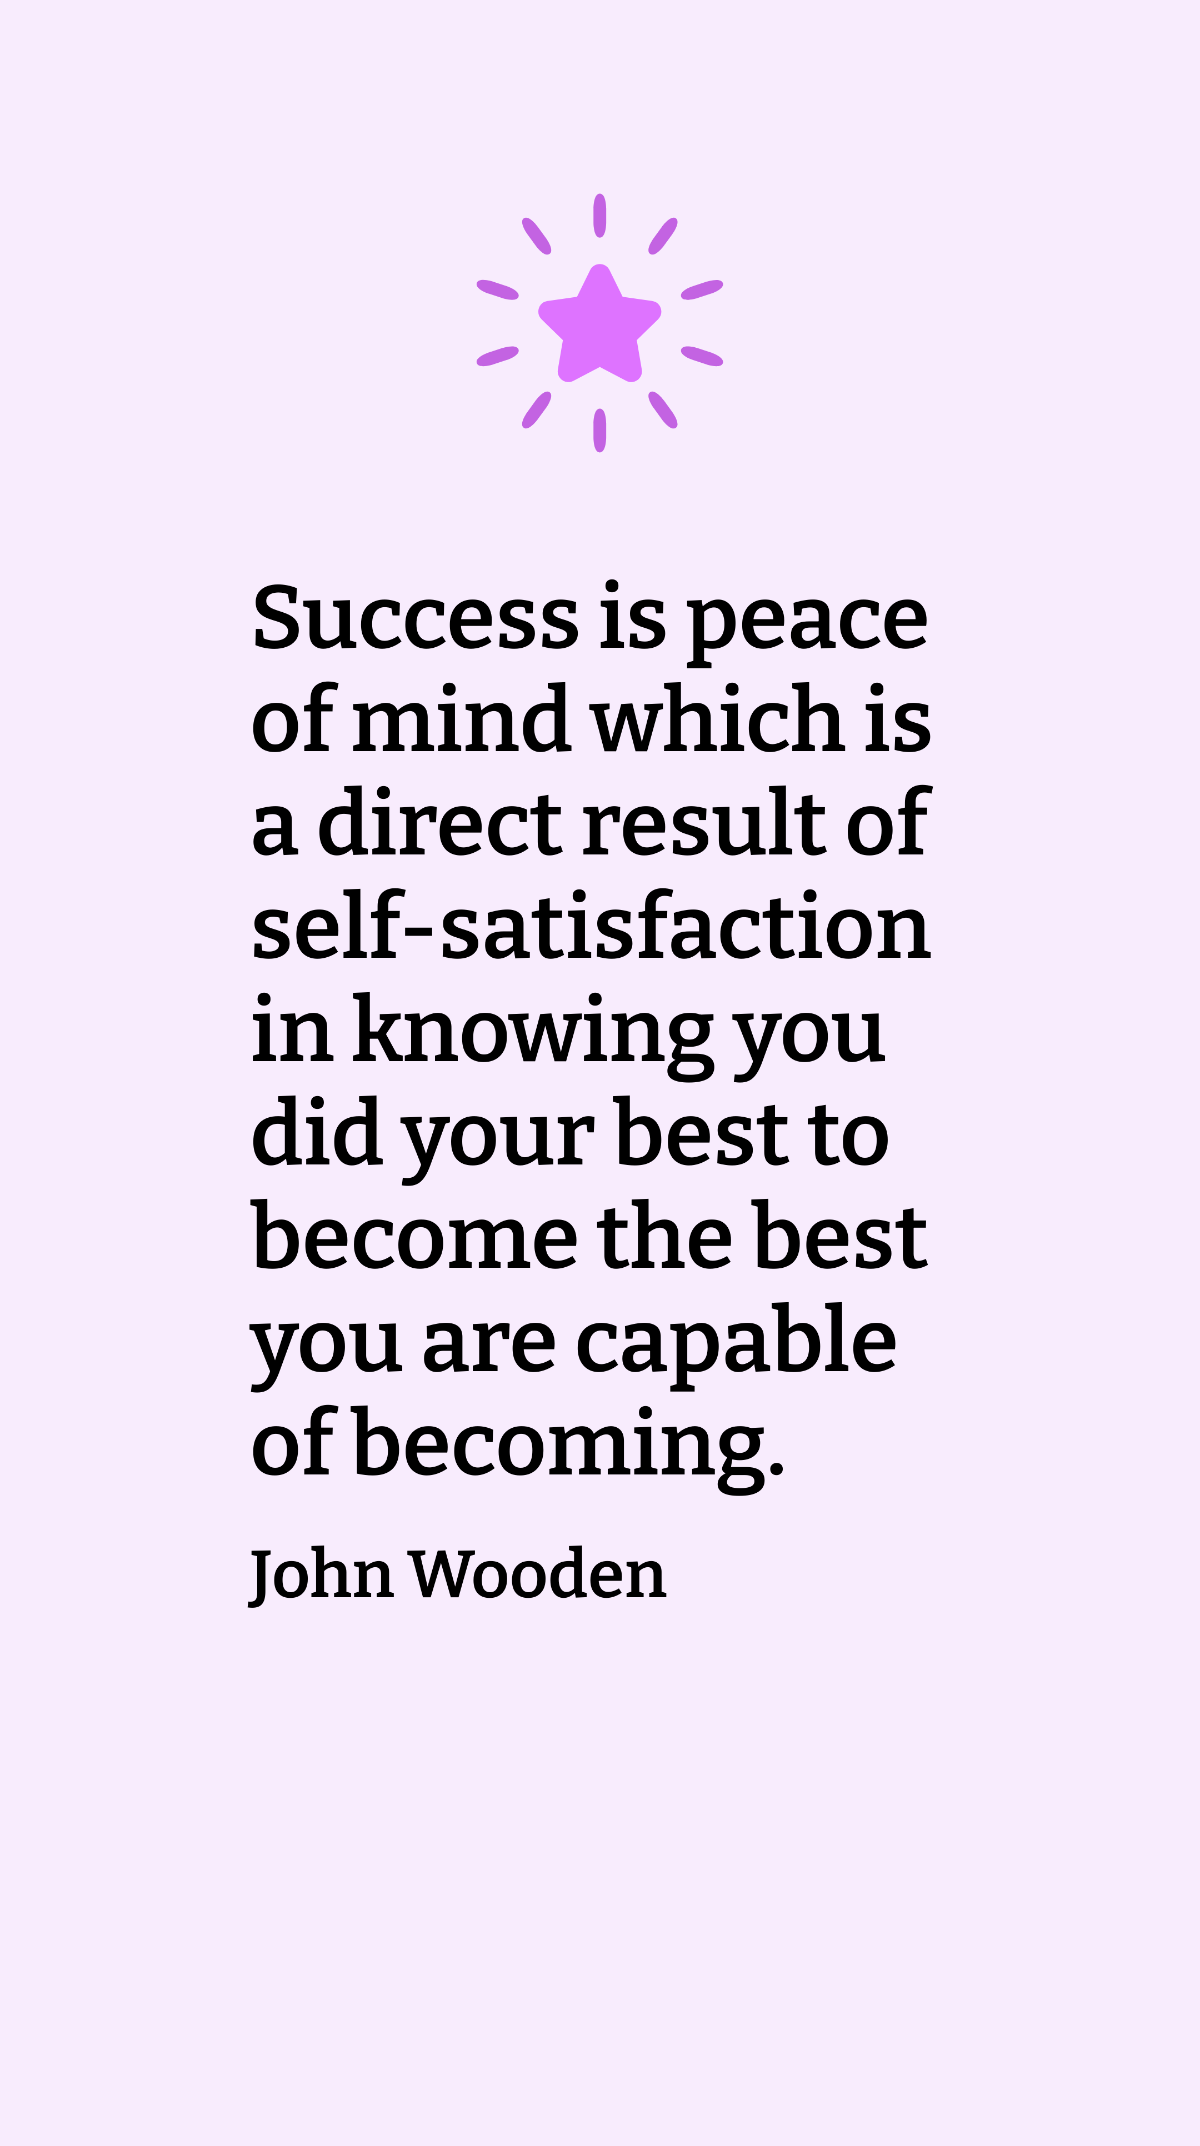 John Wooden - Success is peace of mind which is a direct result of self-satisfaction in knowing you did your best to become the best you are capable of becoming. Template